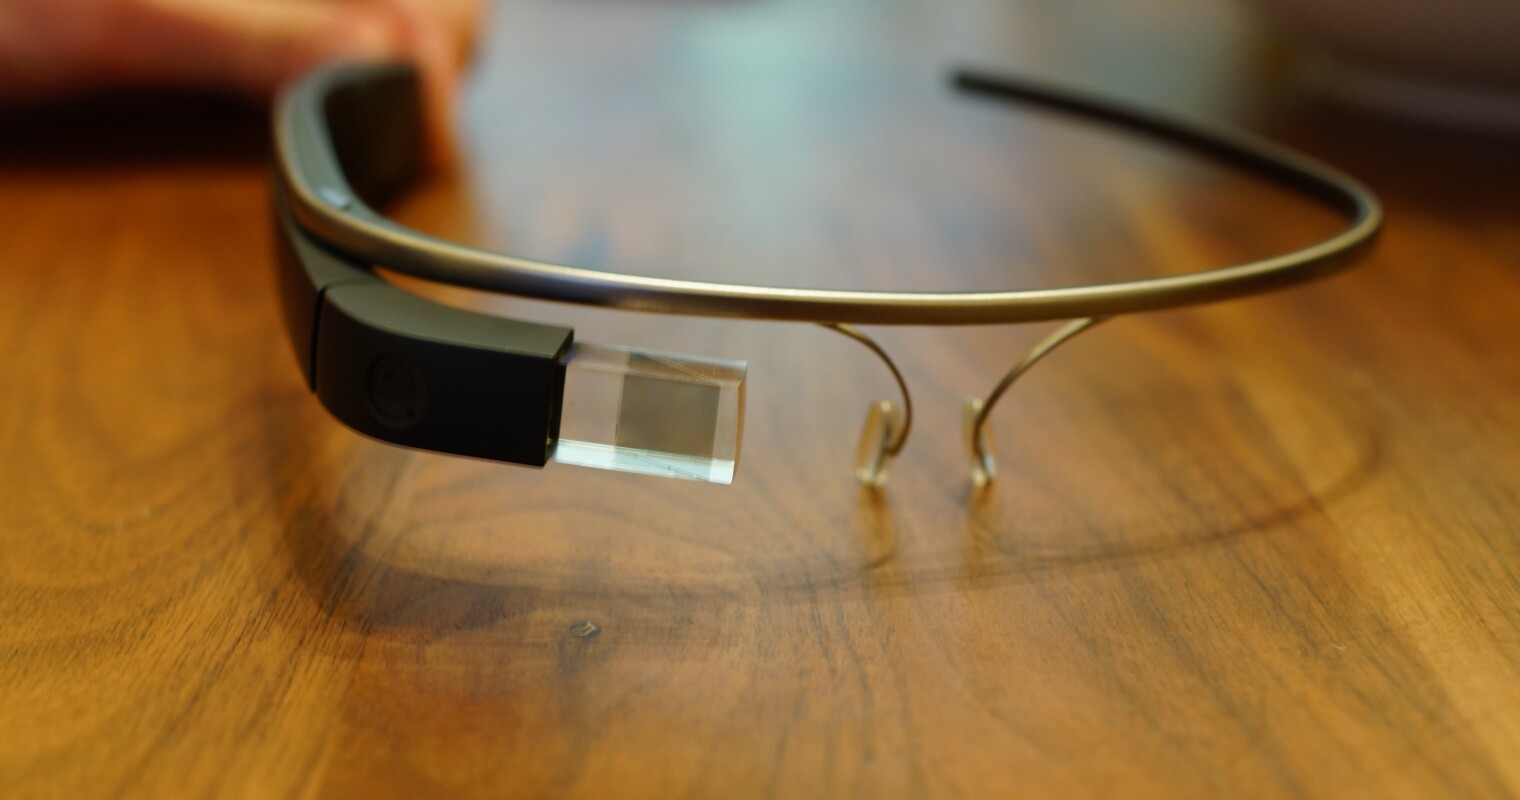 Patent Shows Possible New Google Glass Design, Would You Wear These?